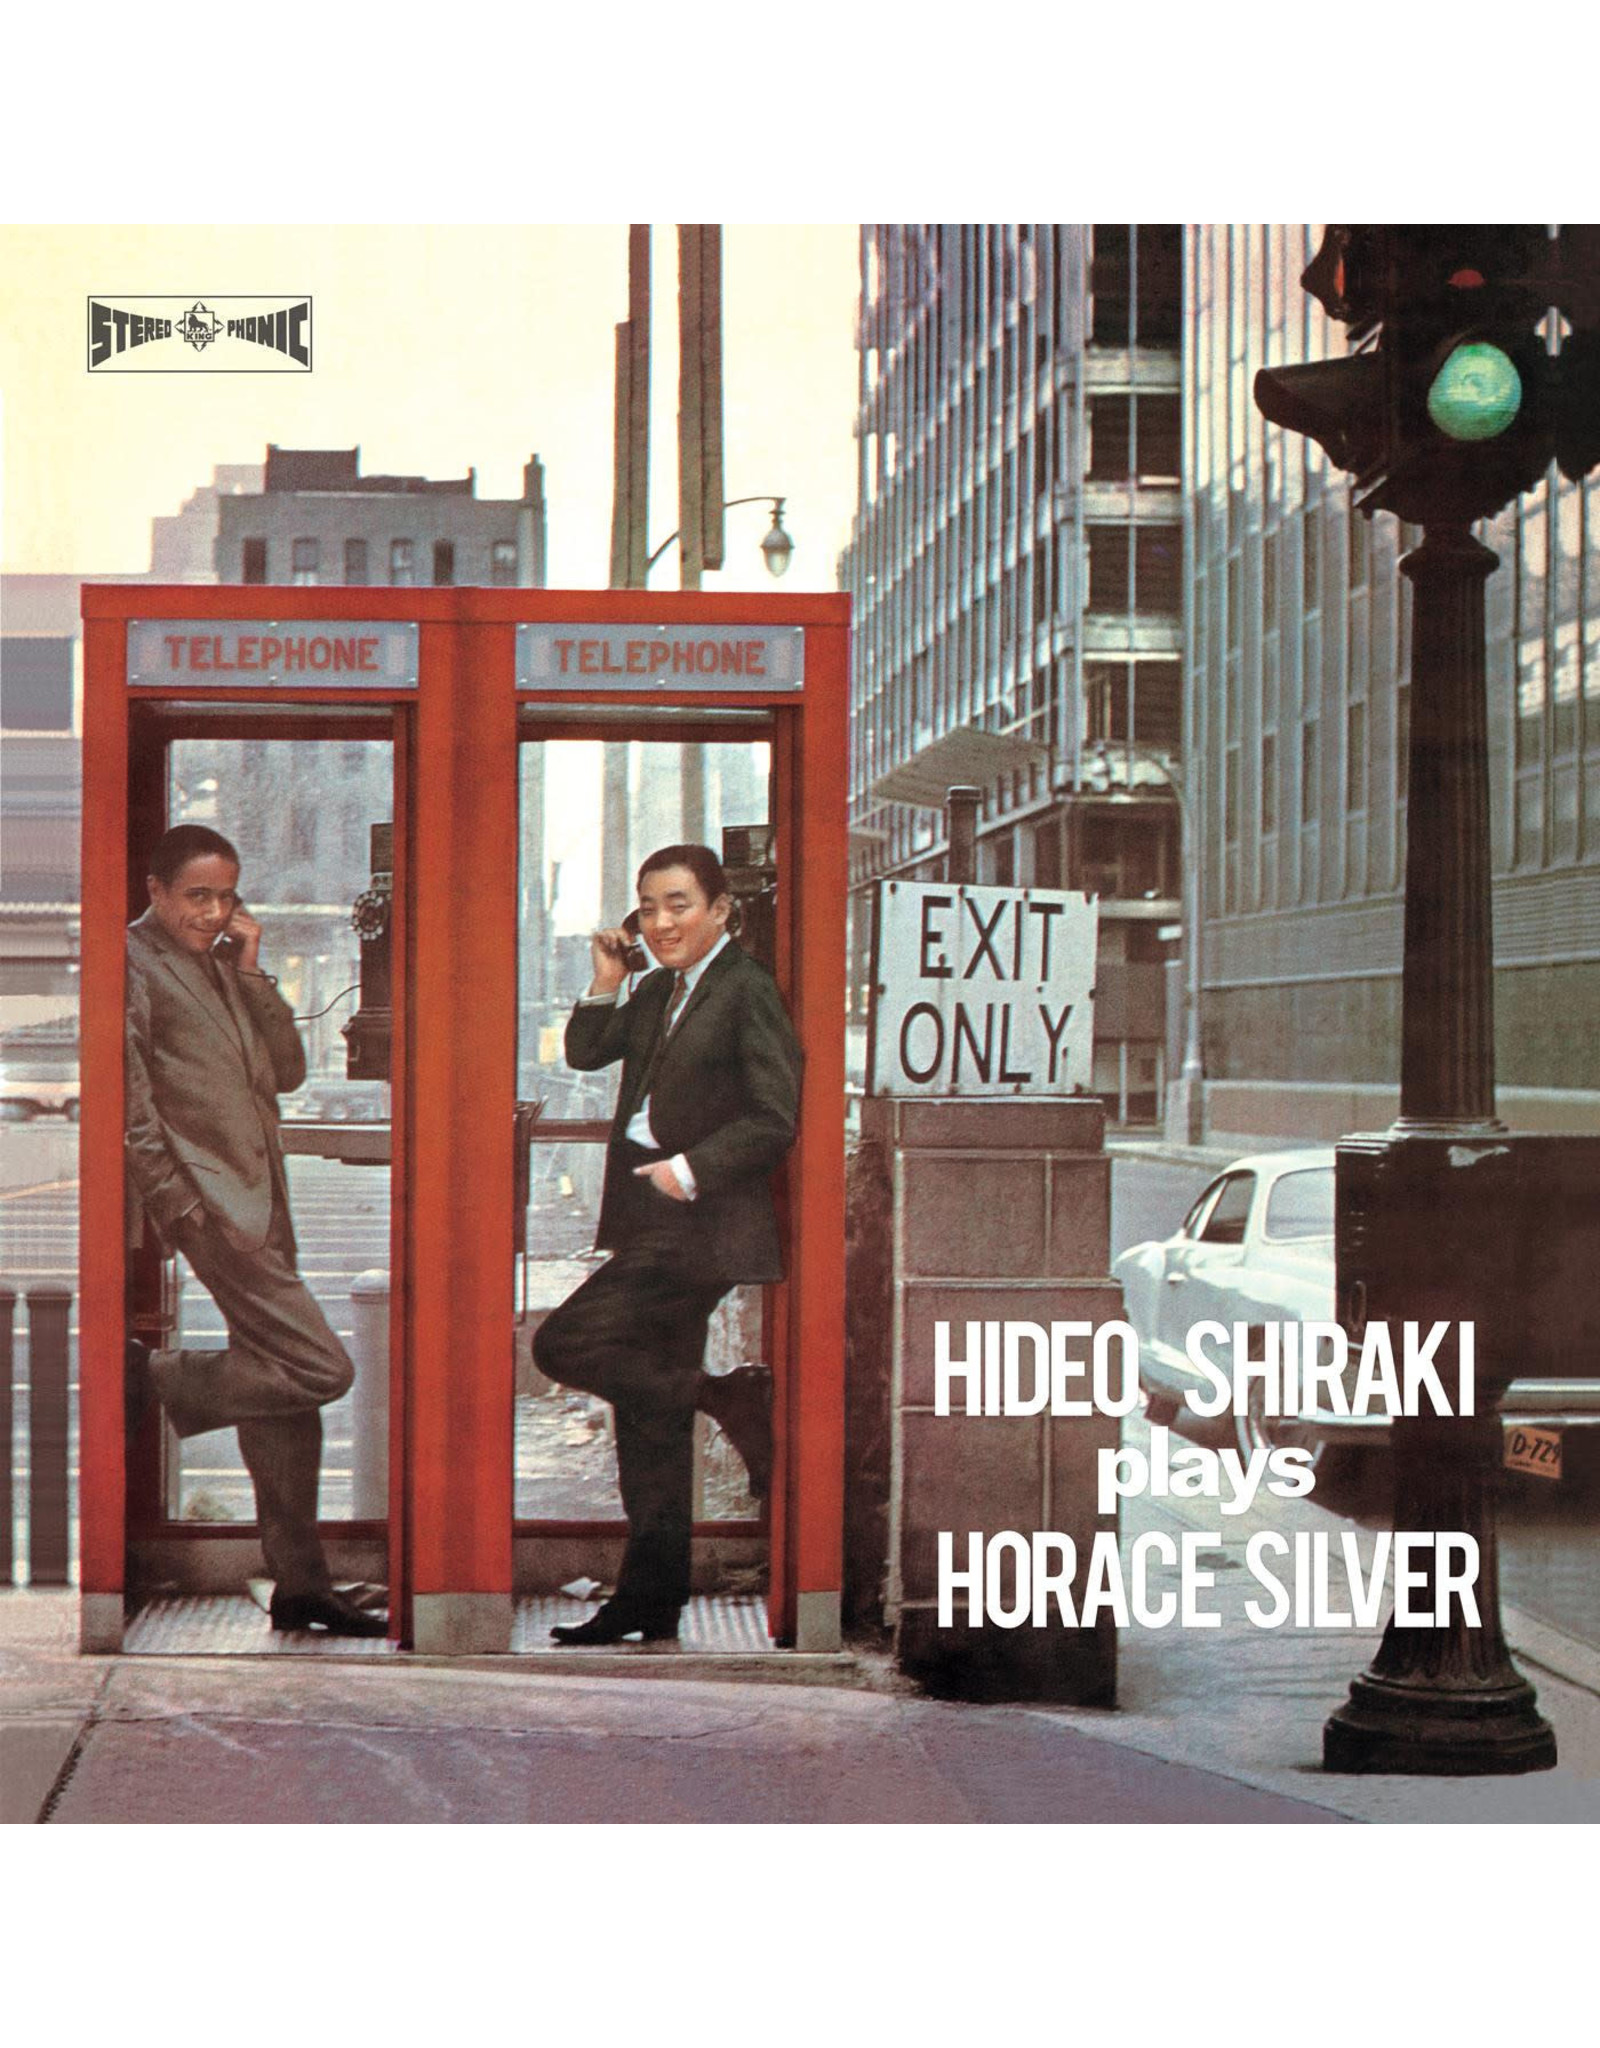 We Are Busy Bodies Shiraki, Hideo Quintet: Plays Horace Silver LP